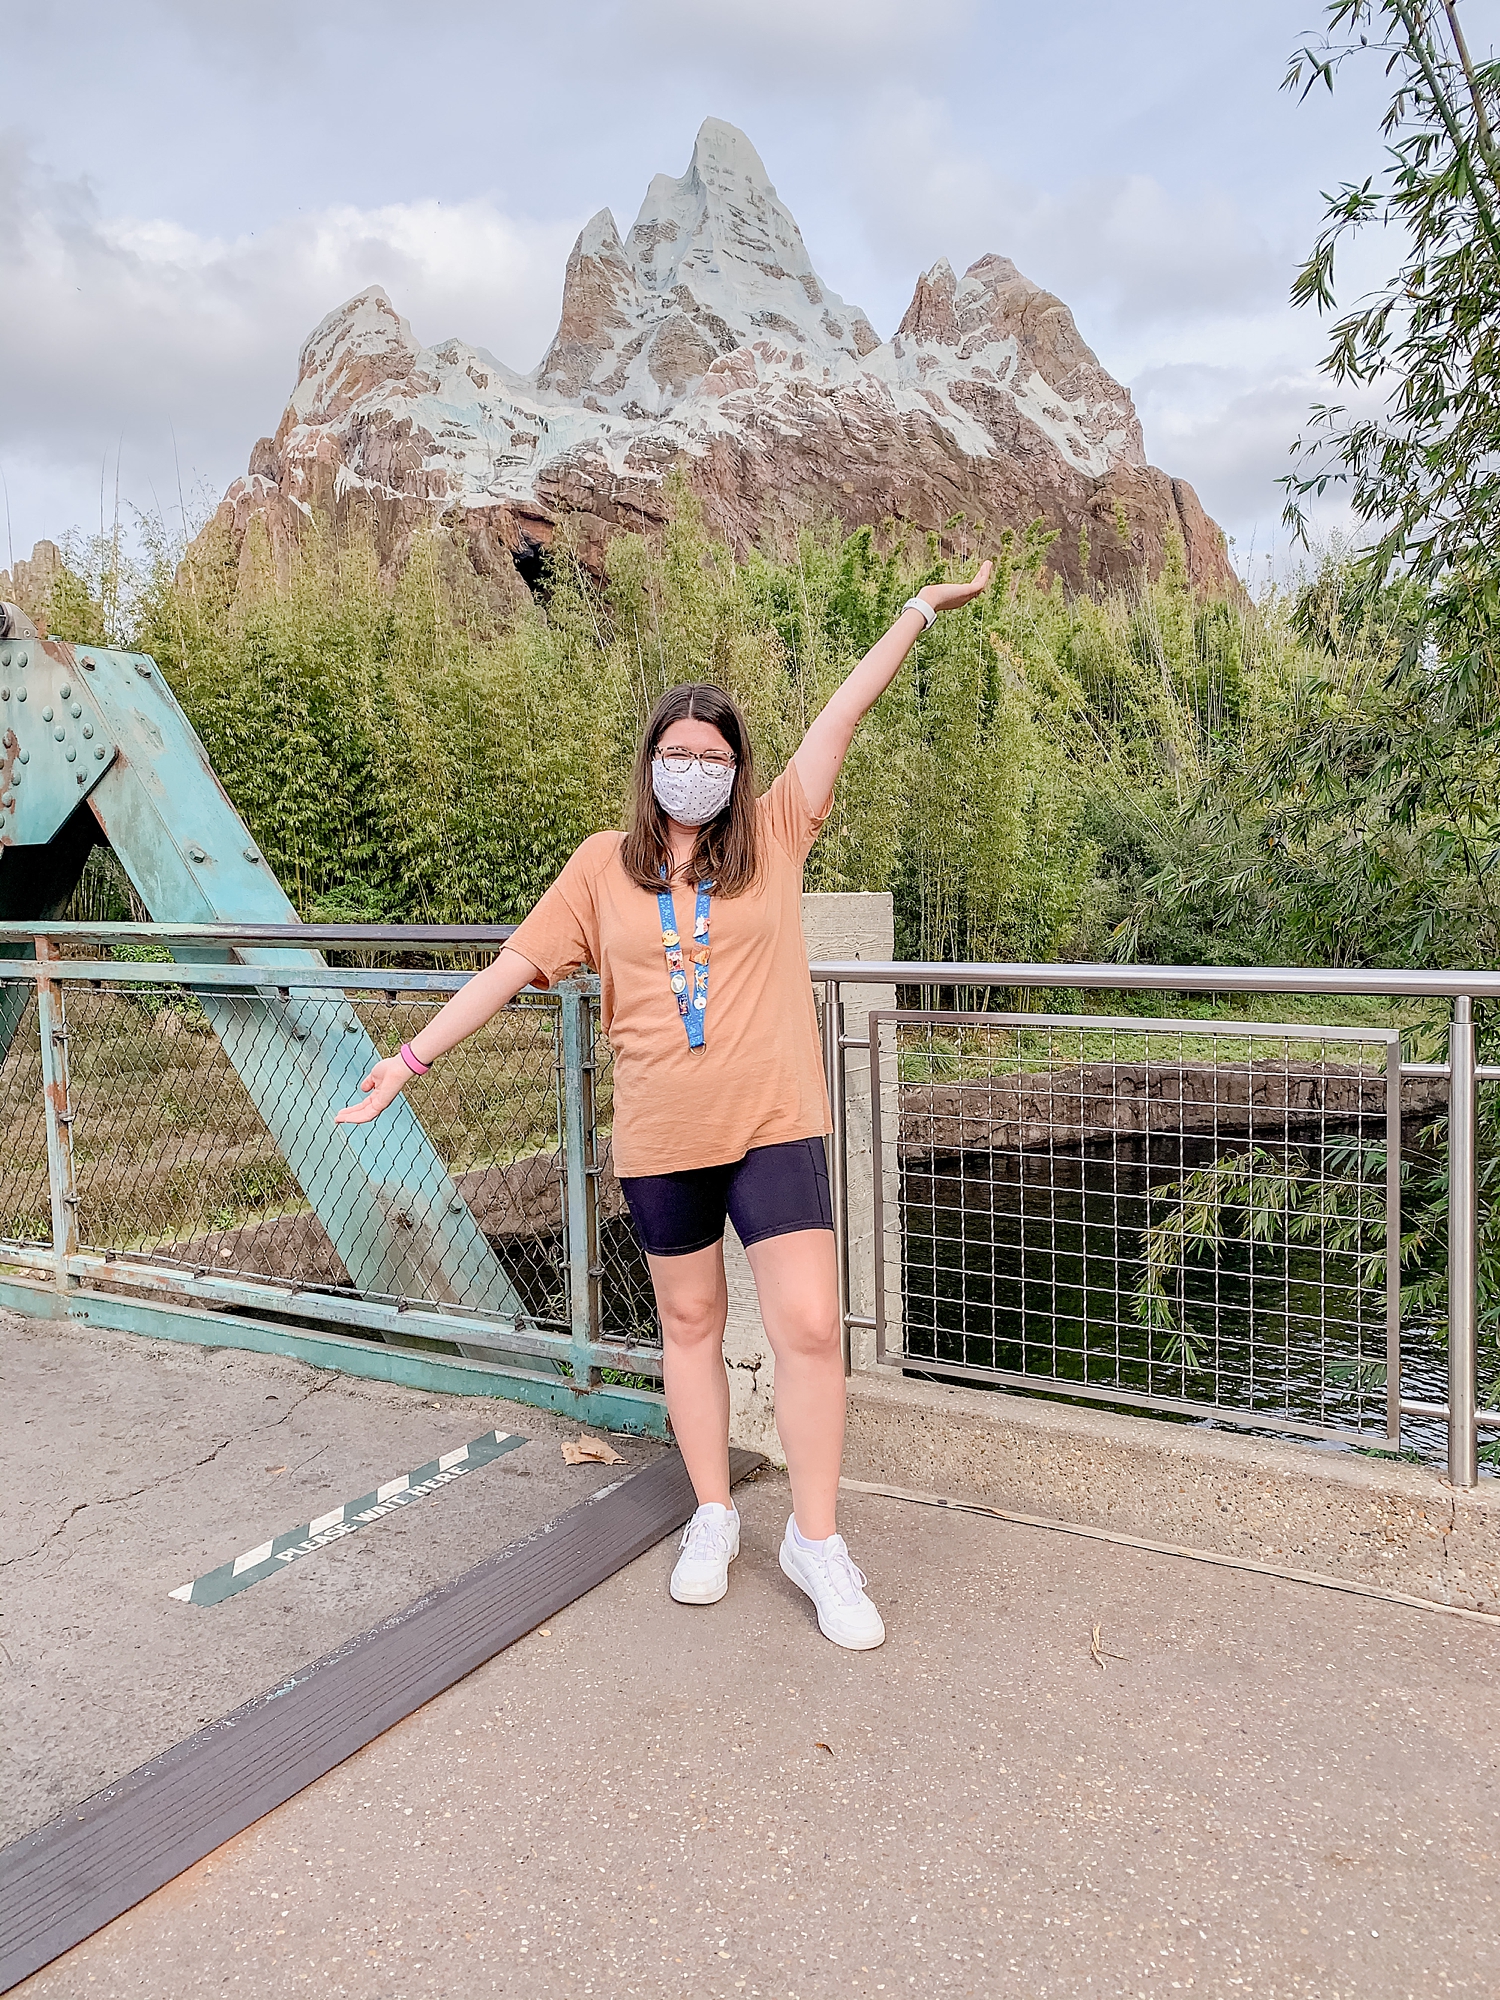 woman poses in front of Expedition Everest